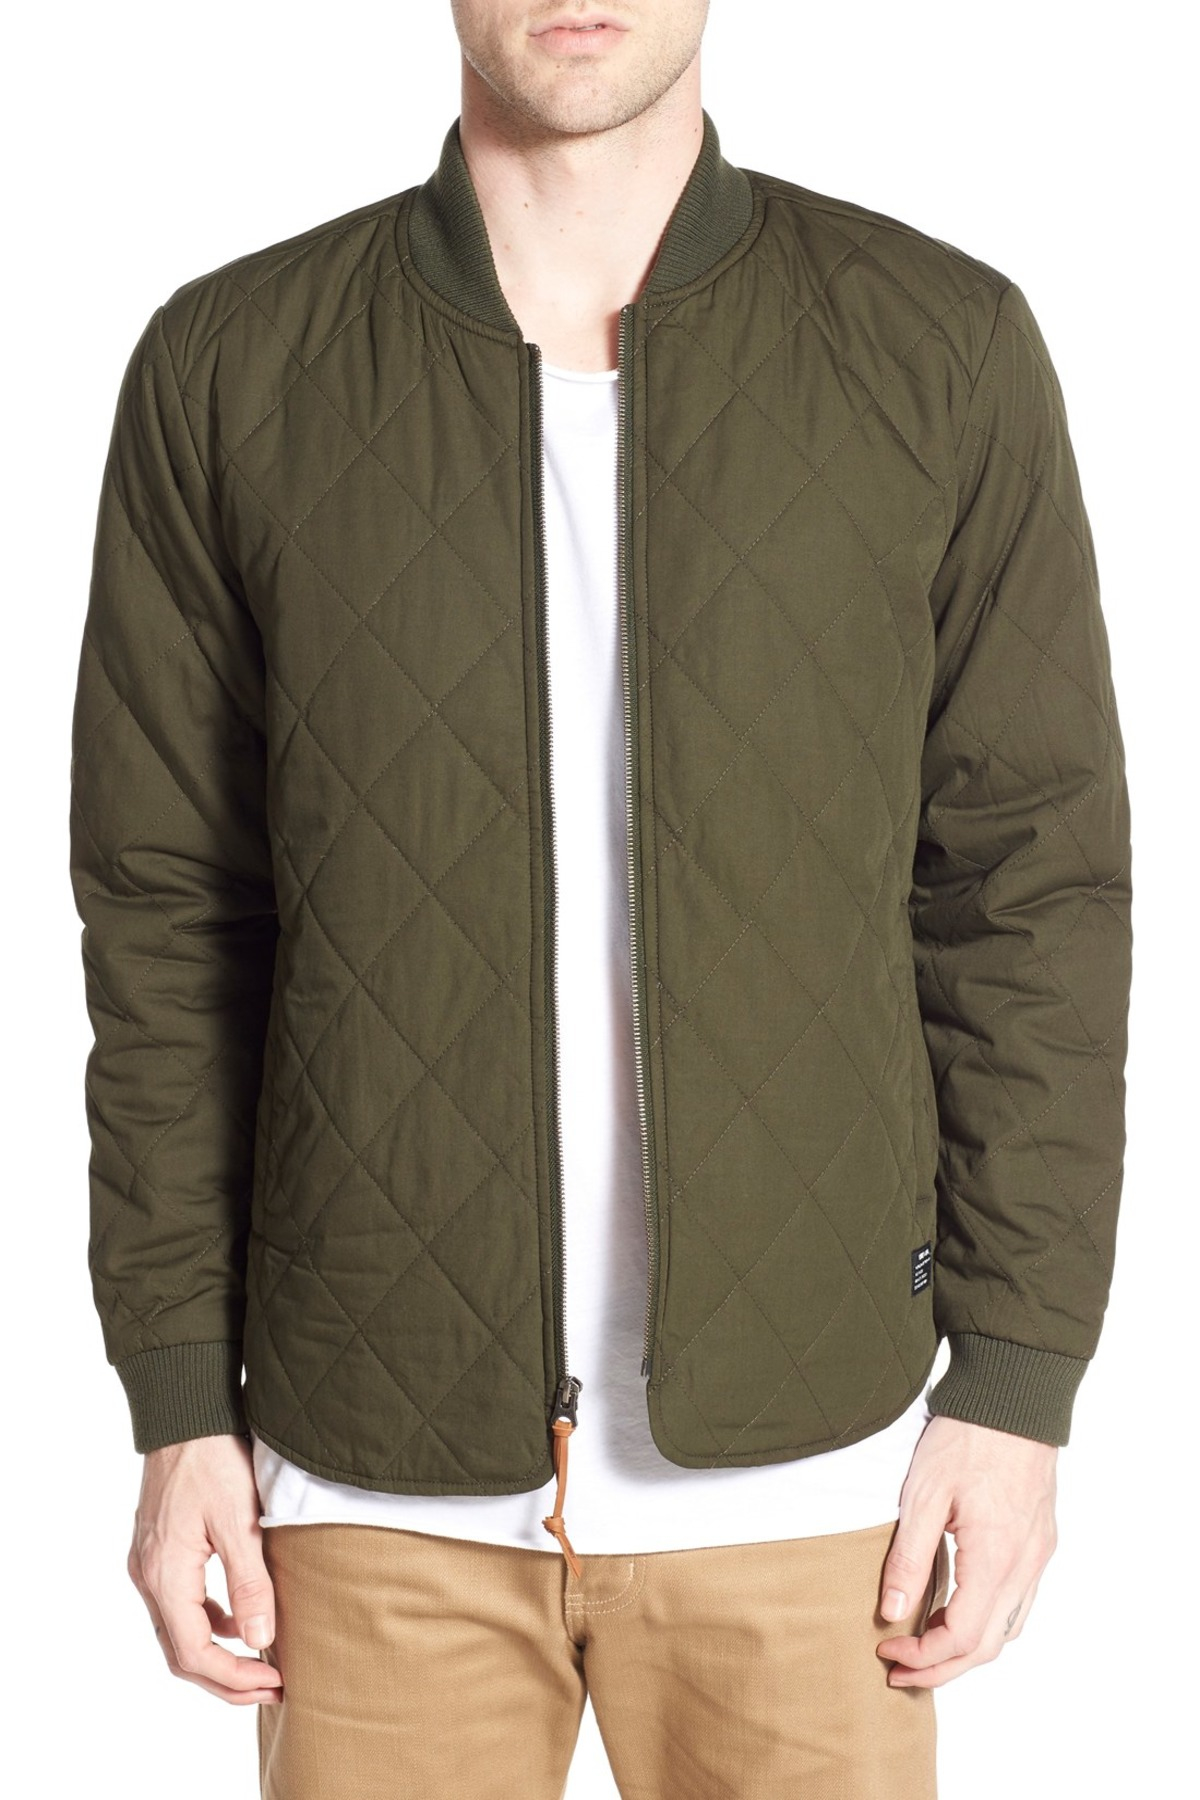 Lyst - Obey Parker Quilted Jacket in Green for Men